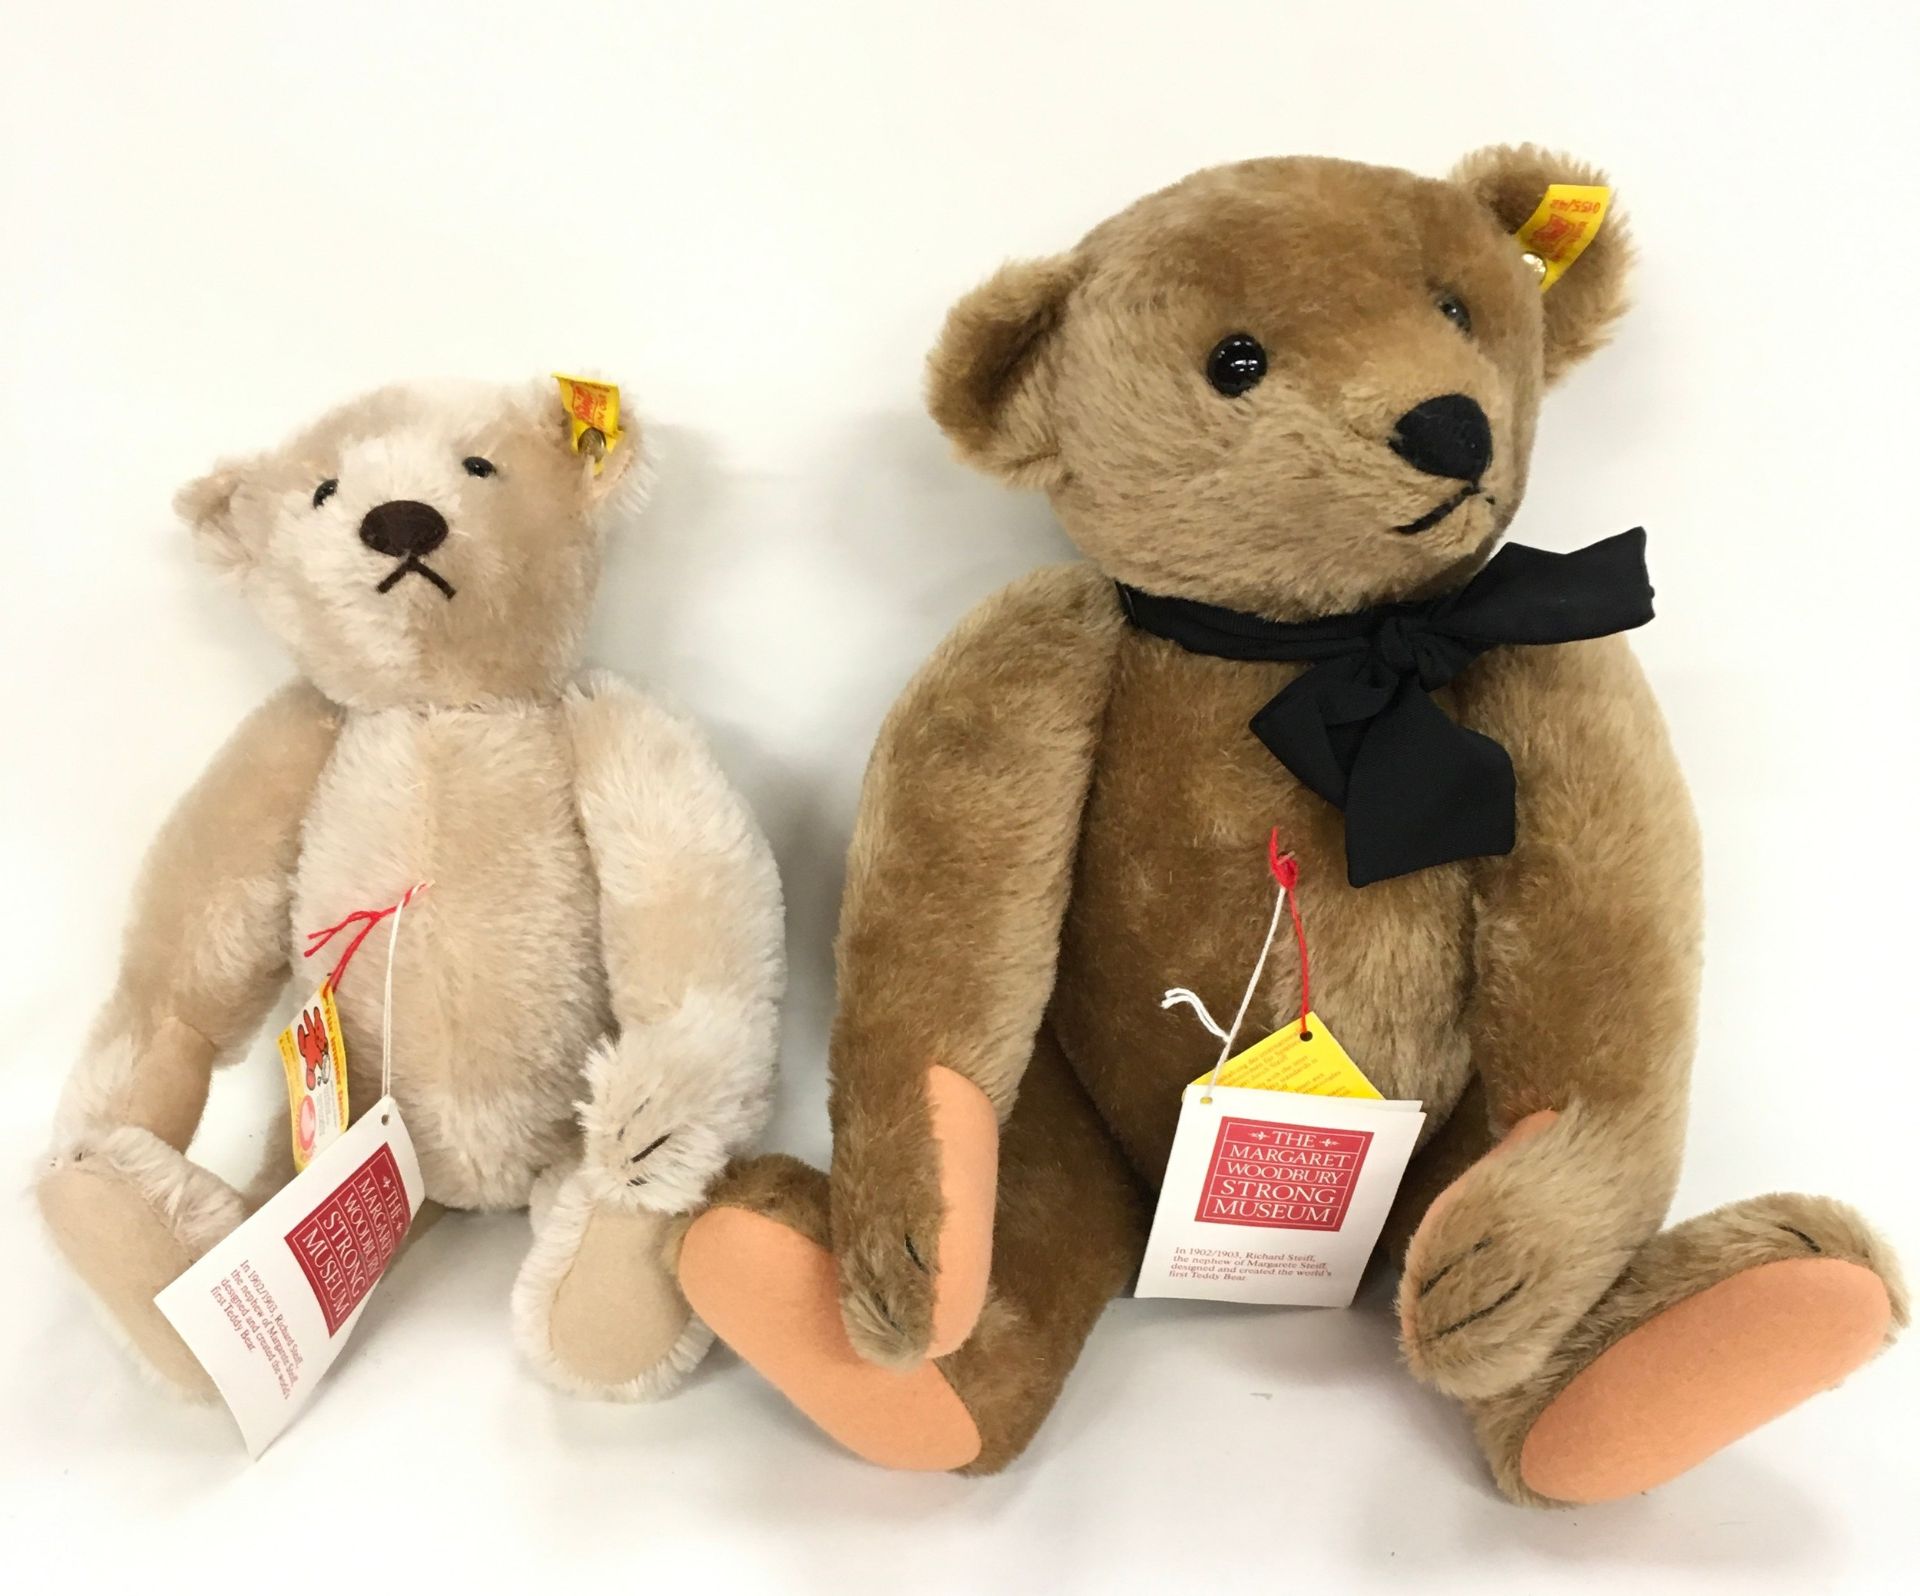 Pair of Steiff Margaret Woodbury Strong 1904 replica teddy bears, golden mohair, yellow tag 0155/